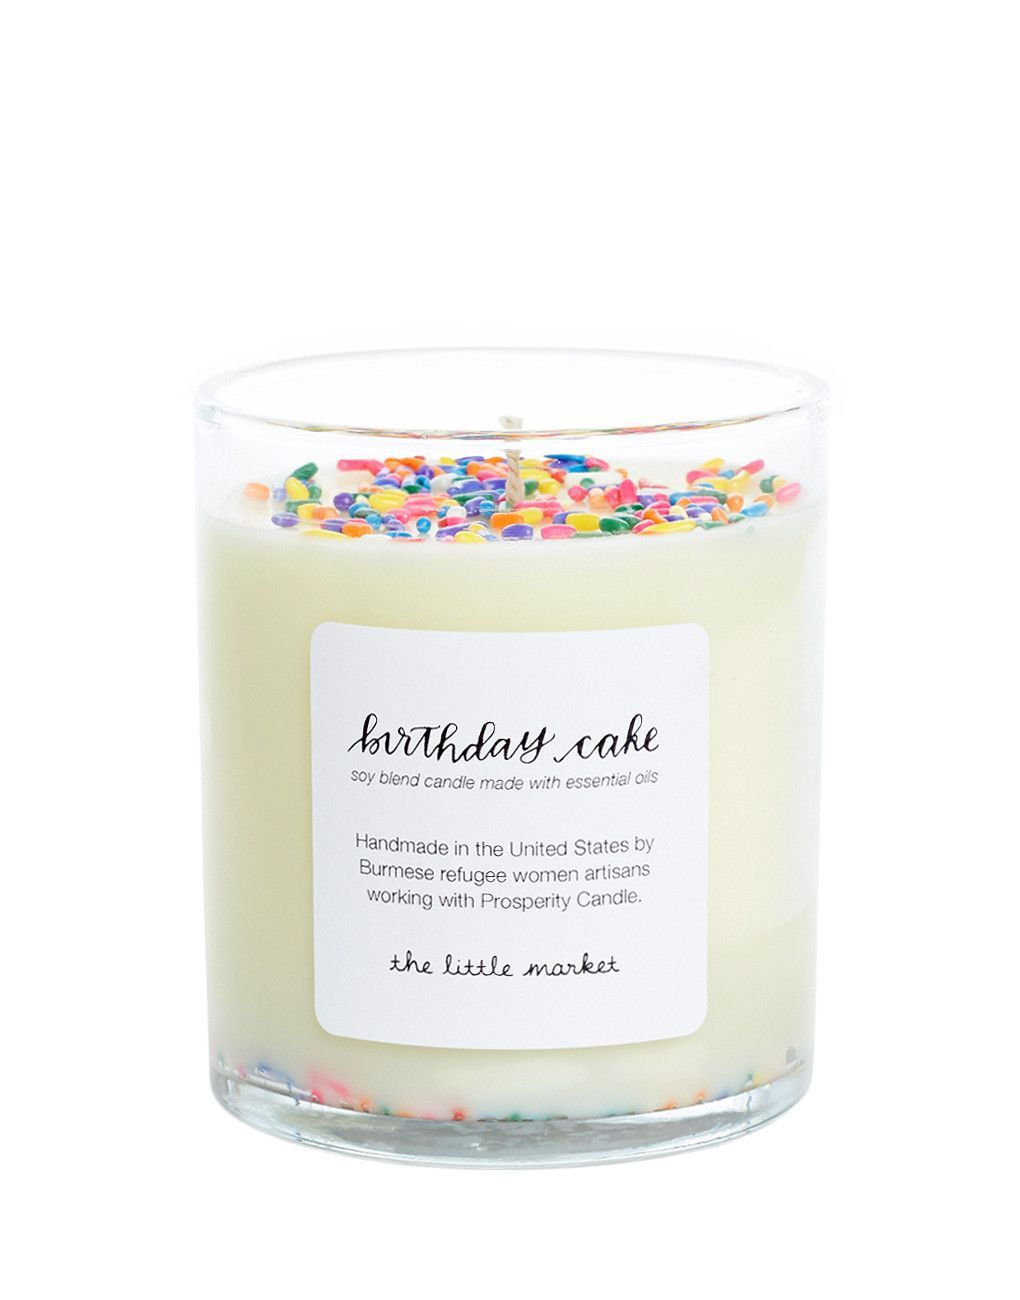 Birthday Cake Scented Candles
 The Little Market Soy Blend Candle Birthday Cake